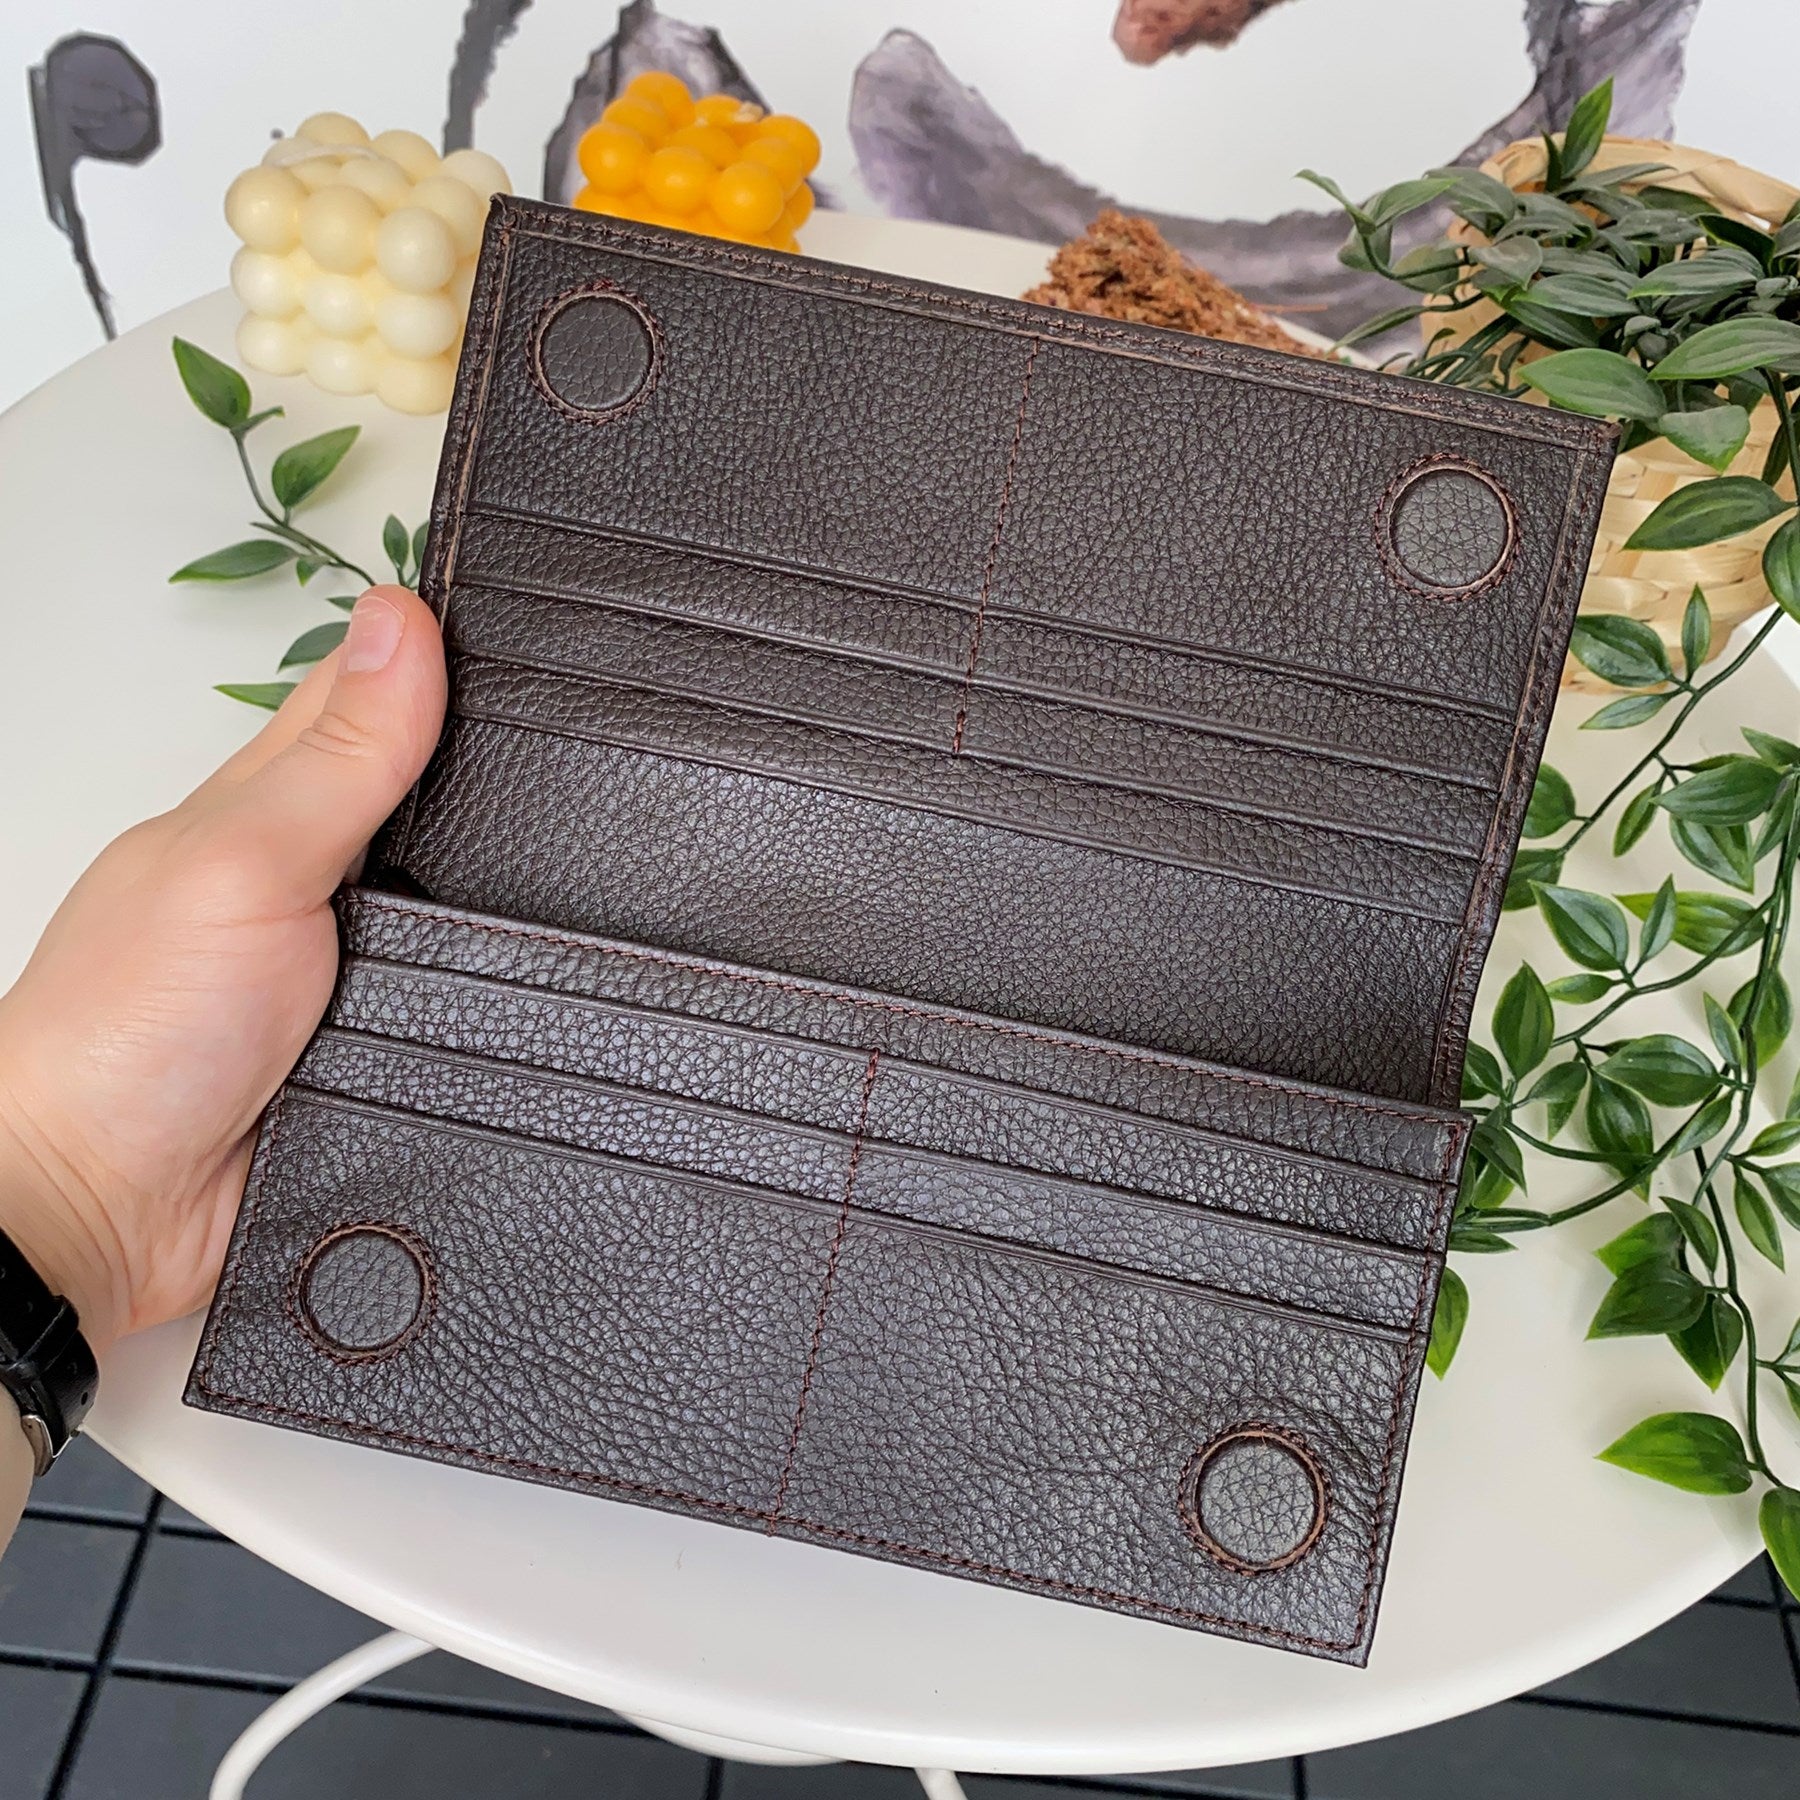 Verona - Genuine Leather Magnetic Large Wallet with Phone Compartment